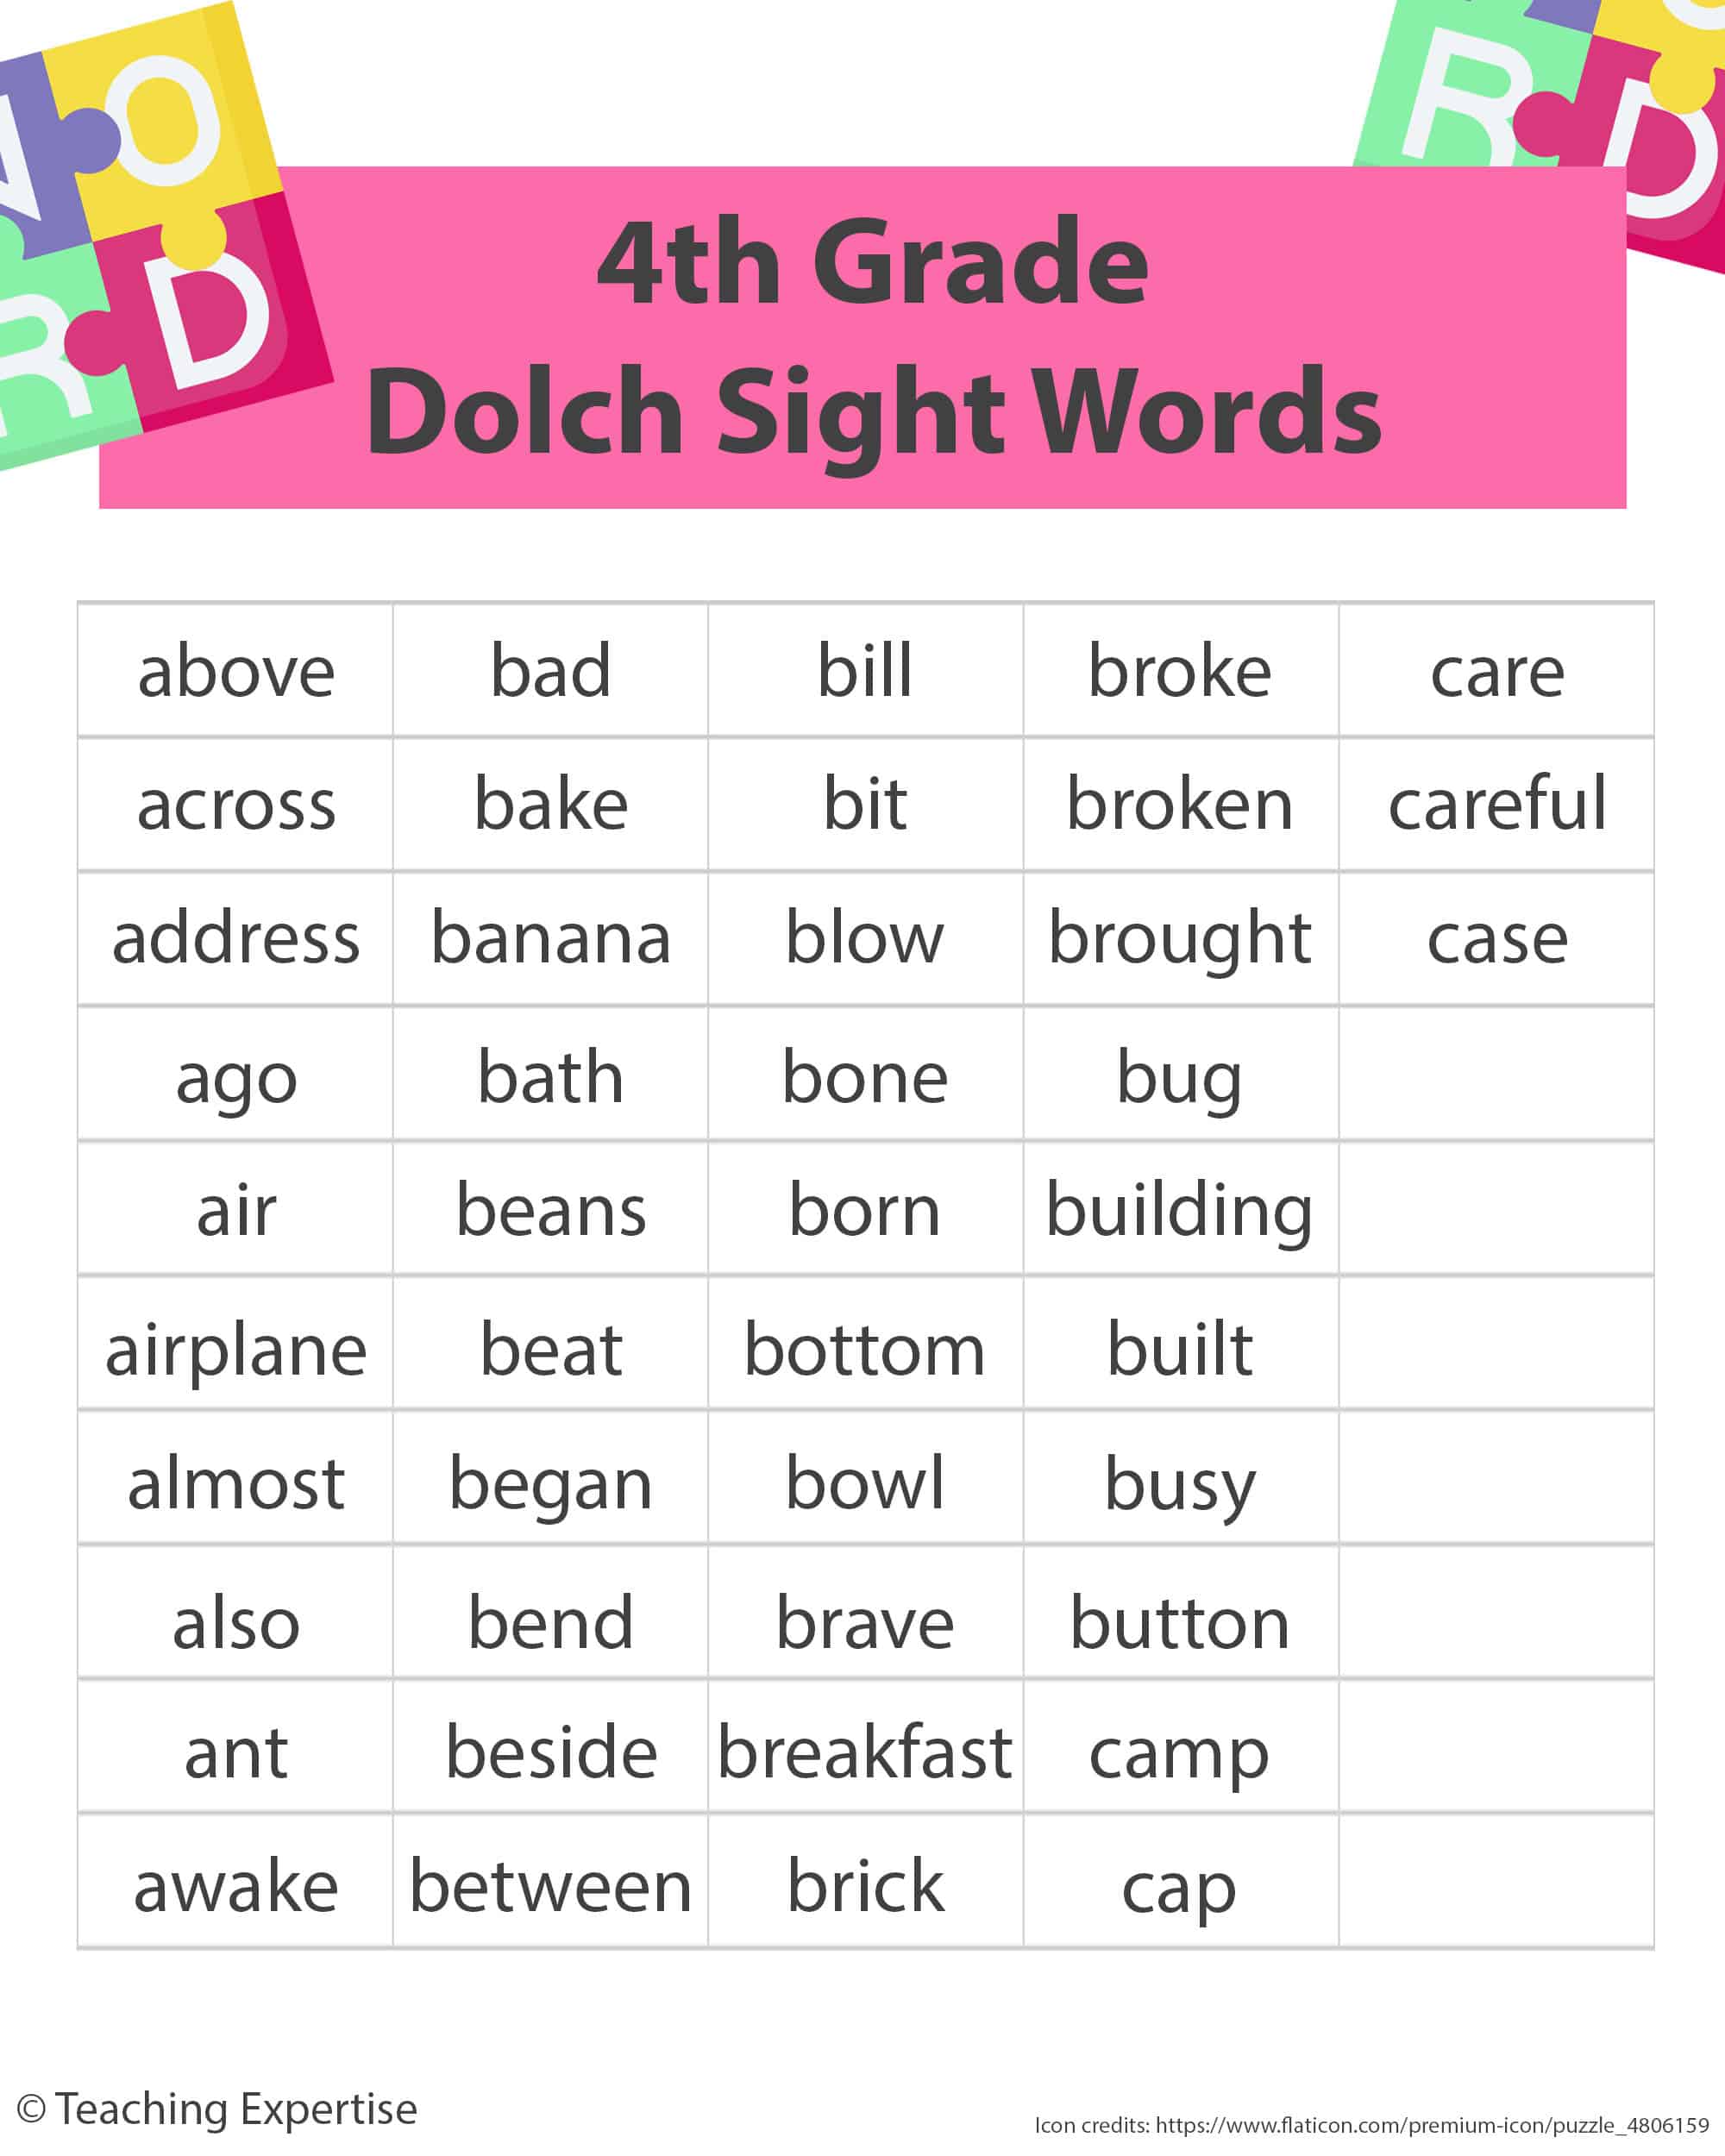 4th grade dolch sight words